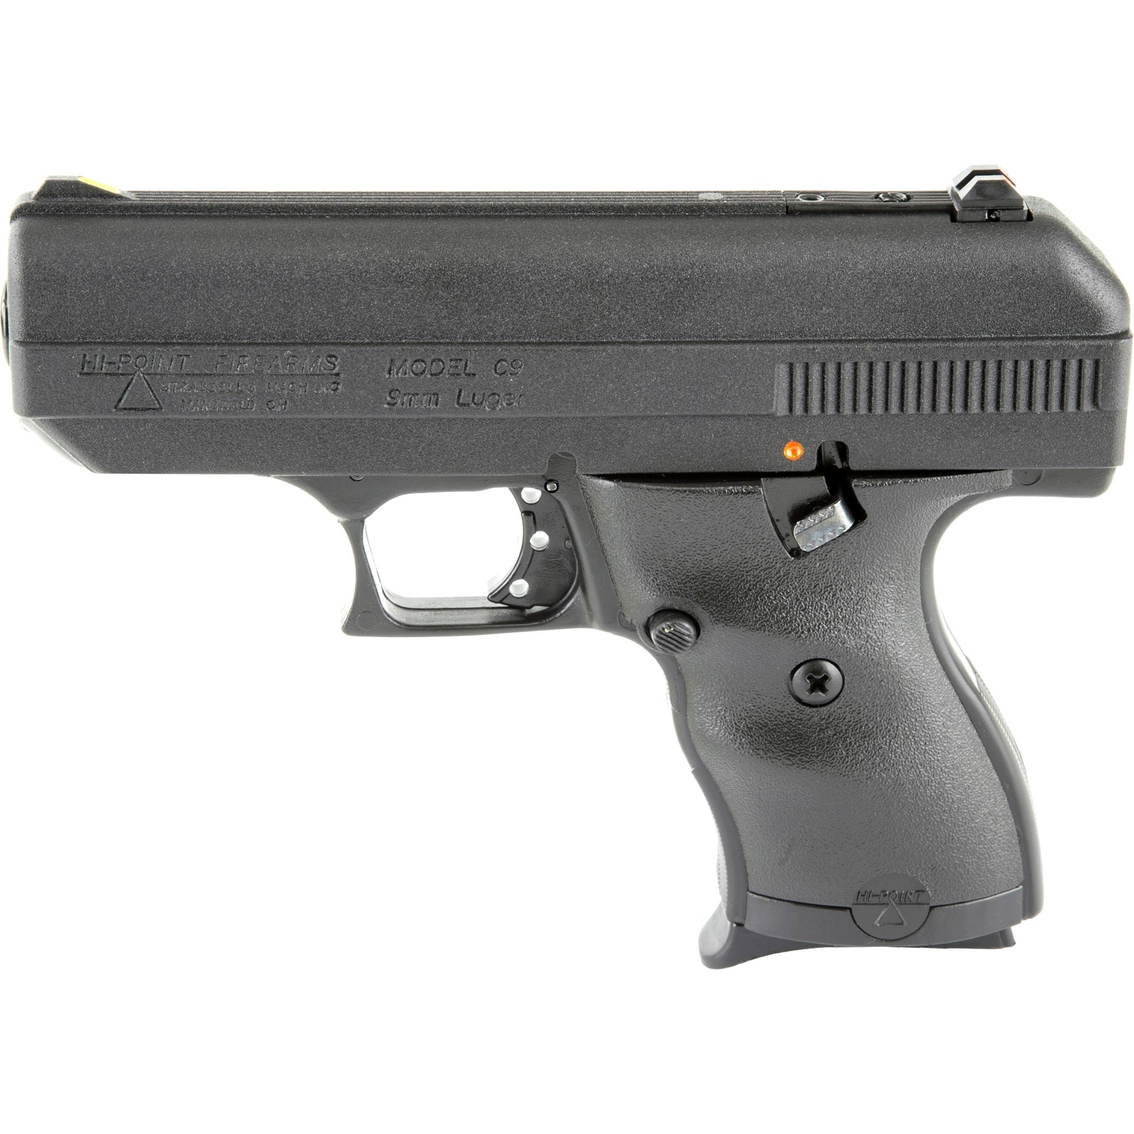 Hi-Point Firearms C-9 9MM 3.5 in. Barrel 8 Rds Pistol Black with Hard Case - Image 2 of 3